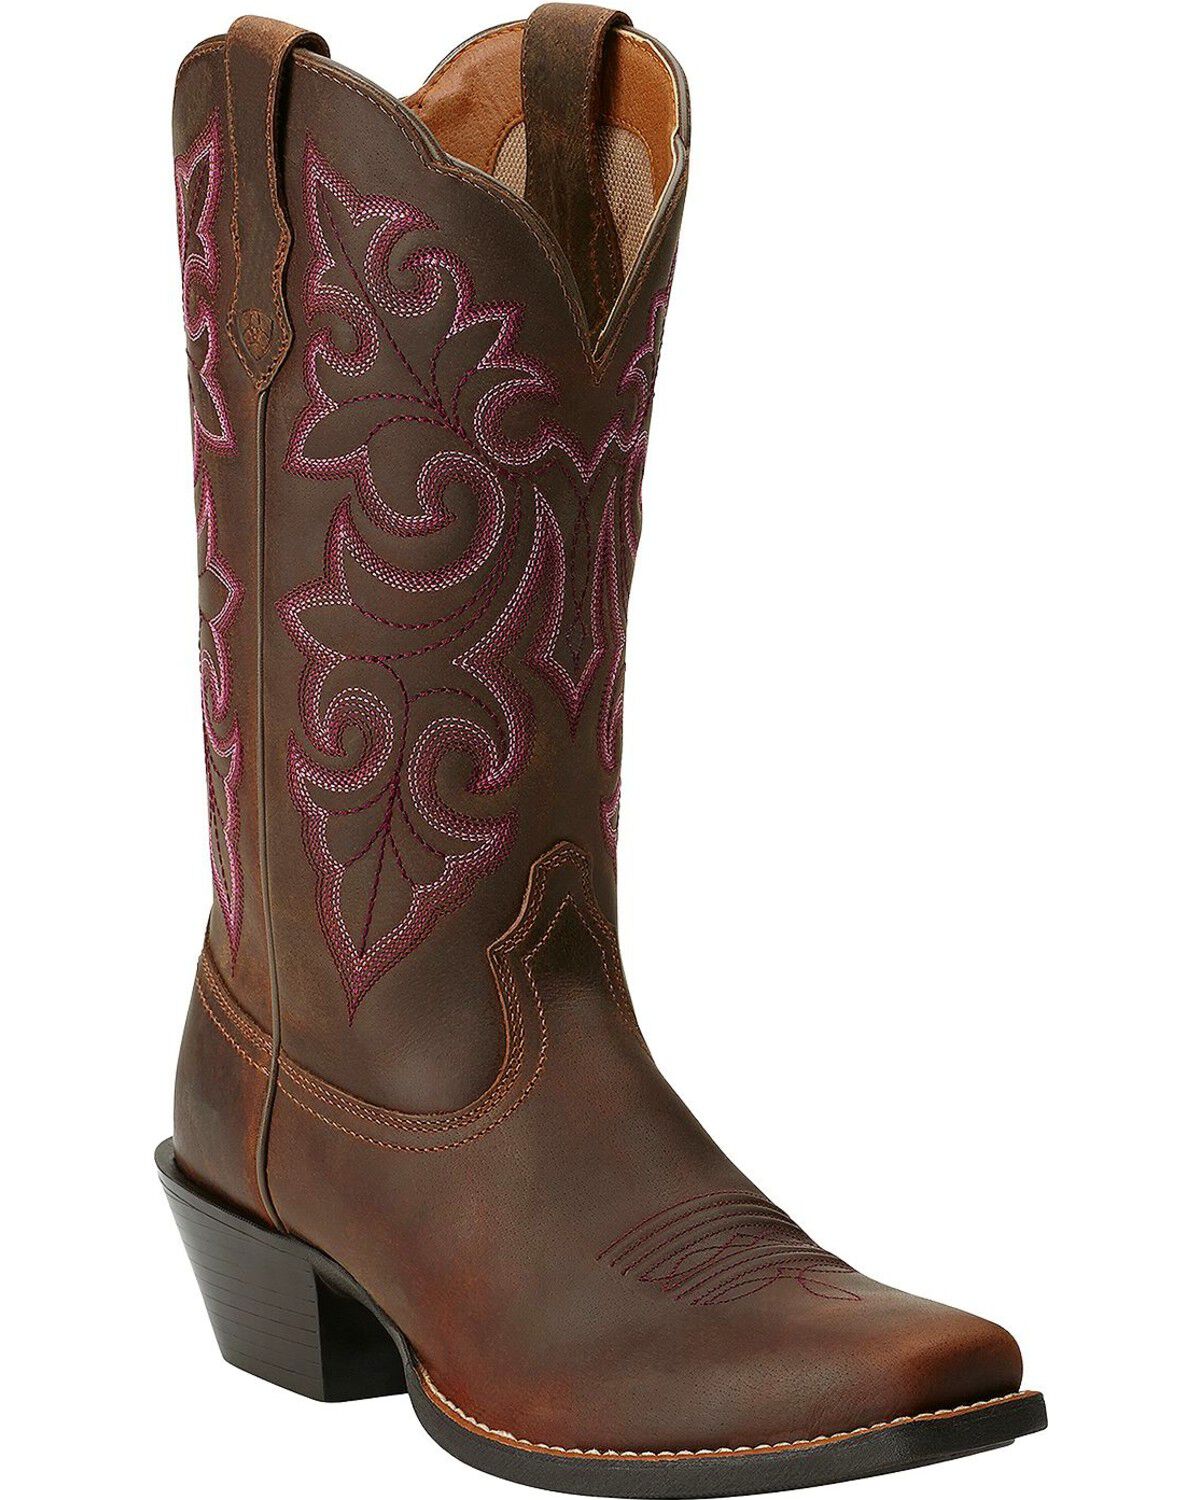 Ariat Round Up Santa Fe Square Toe   Womens  Boots   Mid Calf Low Heel 1-2" 